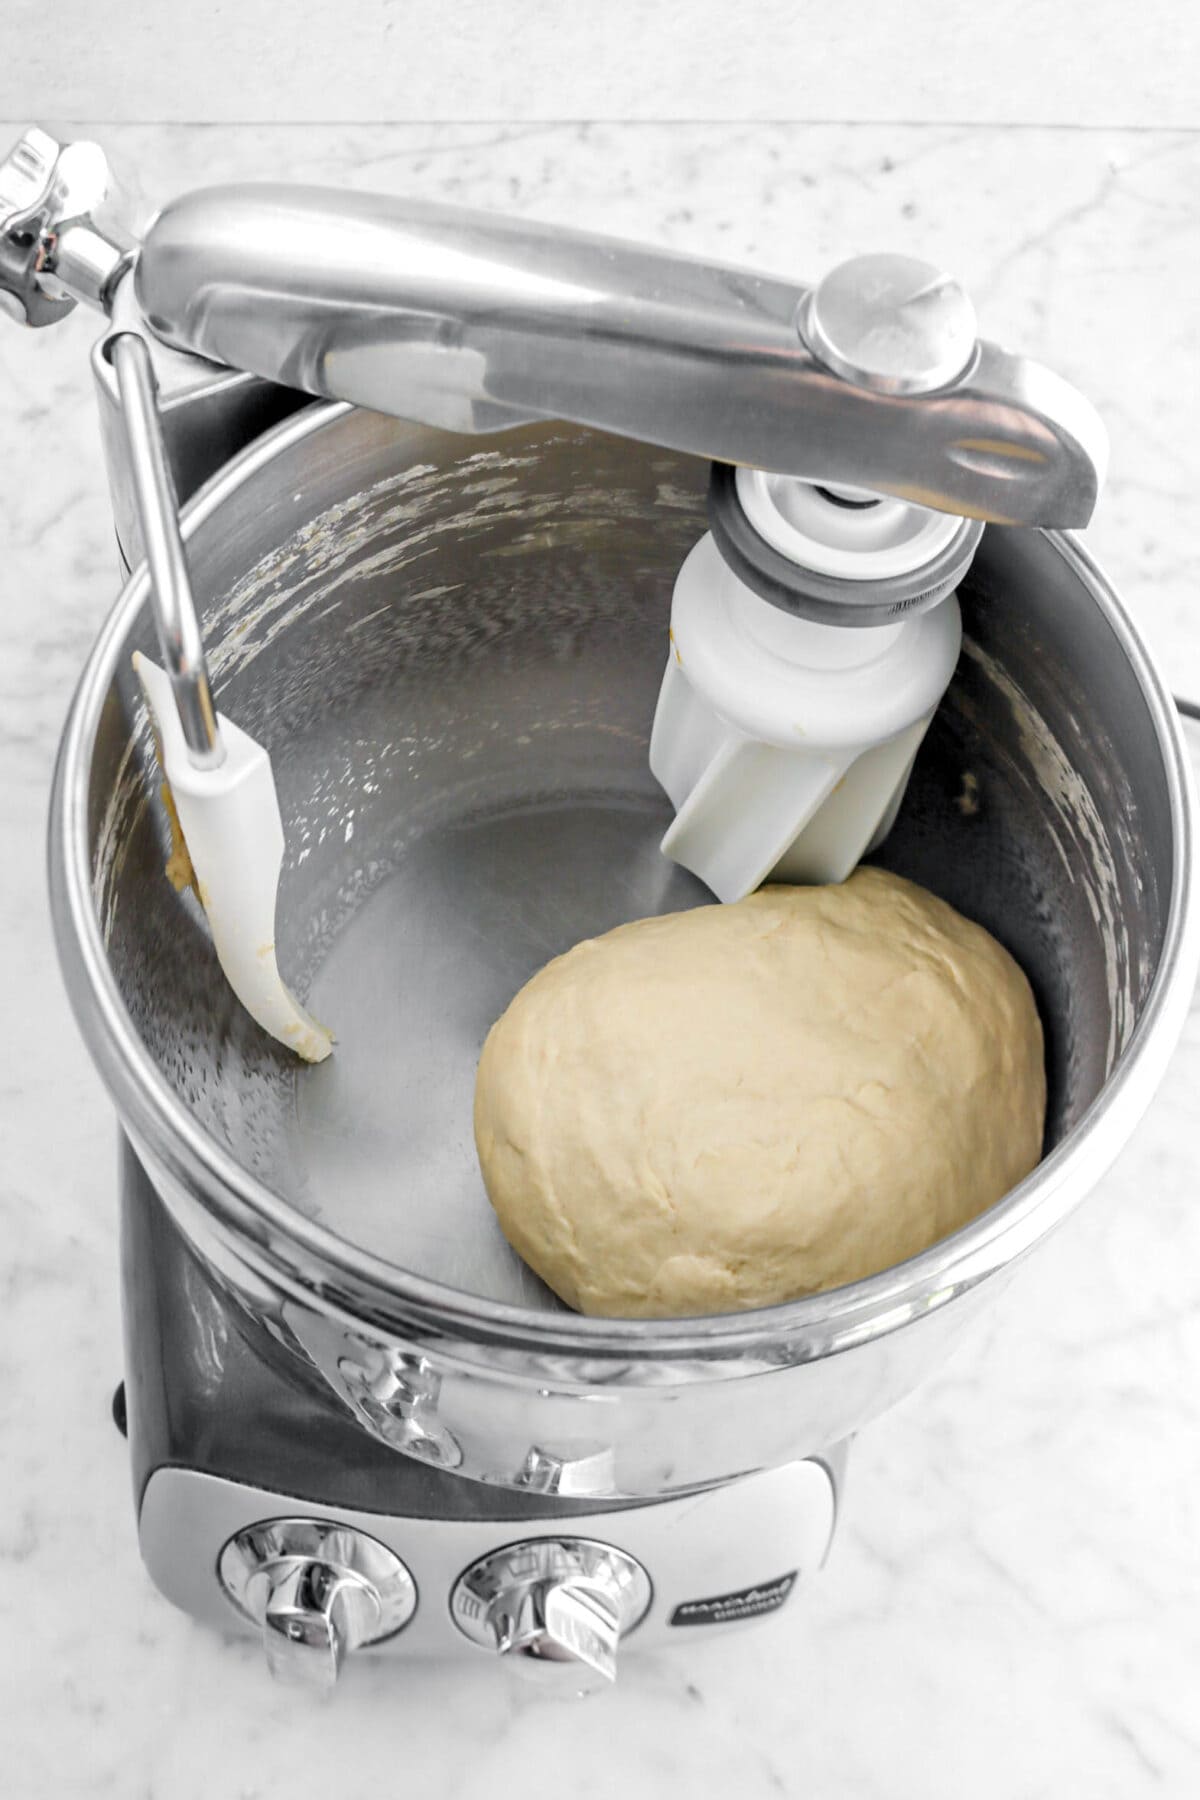 dough in stand mixer.